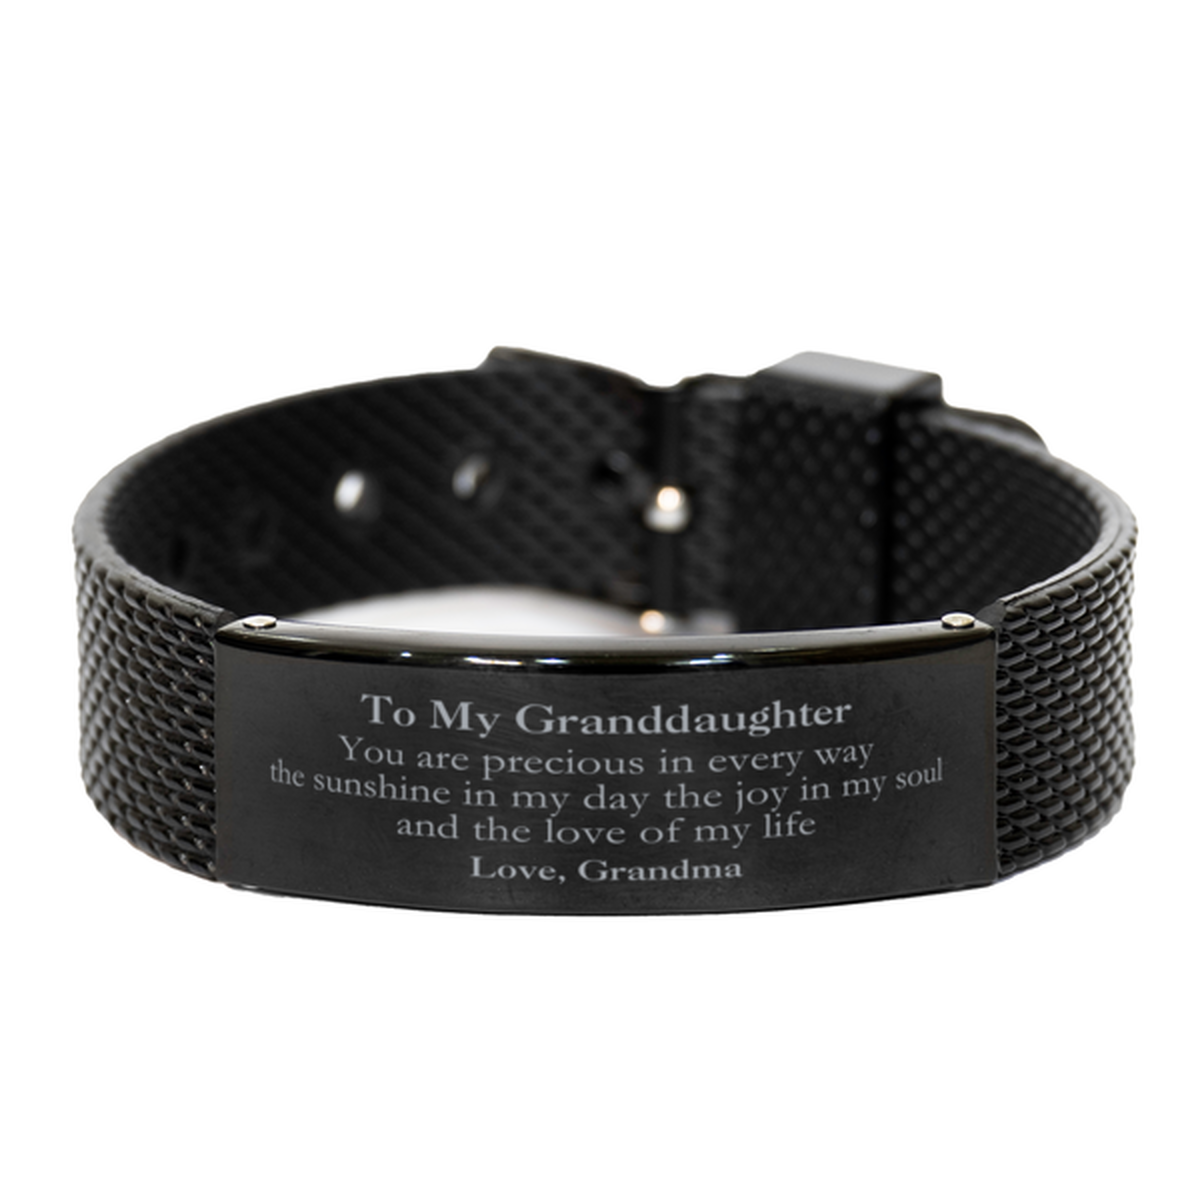 Graduation Gifts for Granddaughter Black Shark Mesh Bracelet Present from Grandma, Christmas Granddaughter Birthday Gifts Granddaughter You are precious in every way the sunshine in my day. Love, Grandma